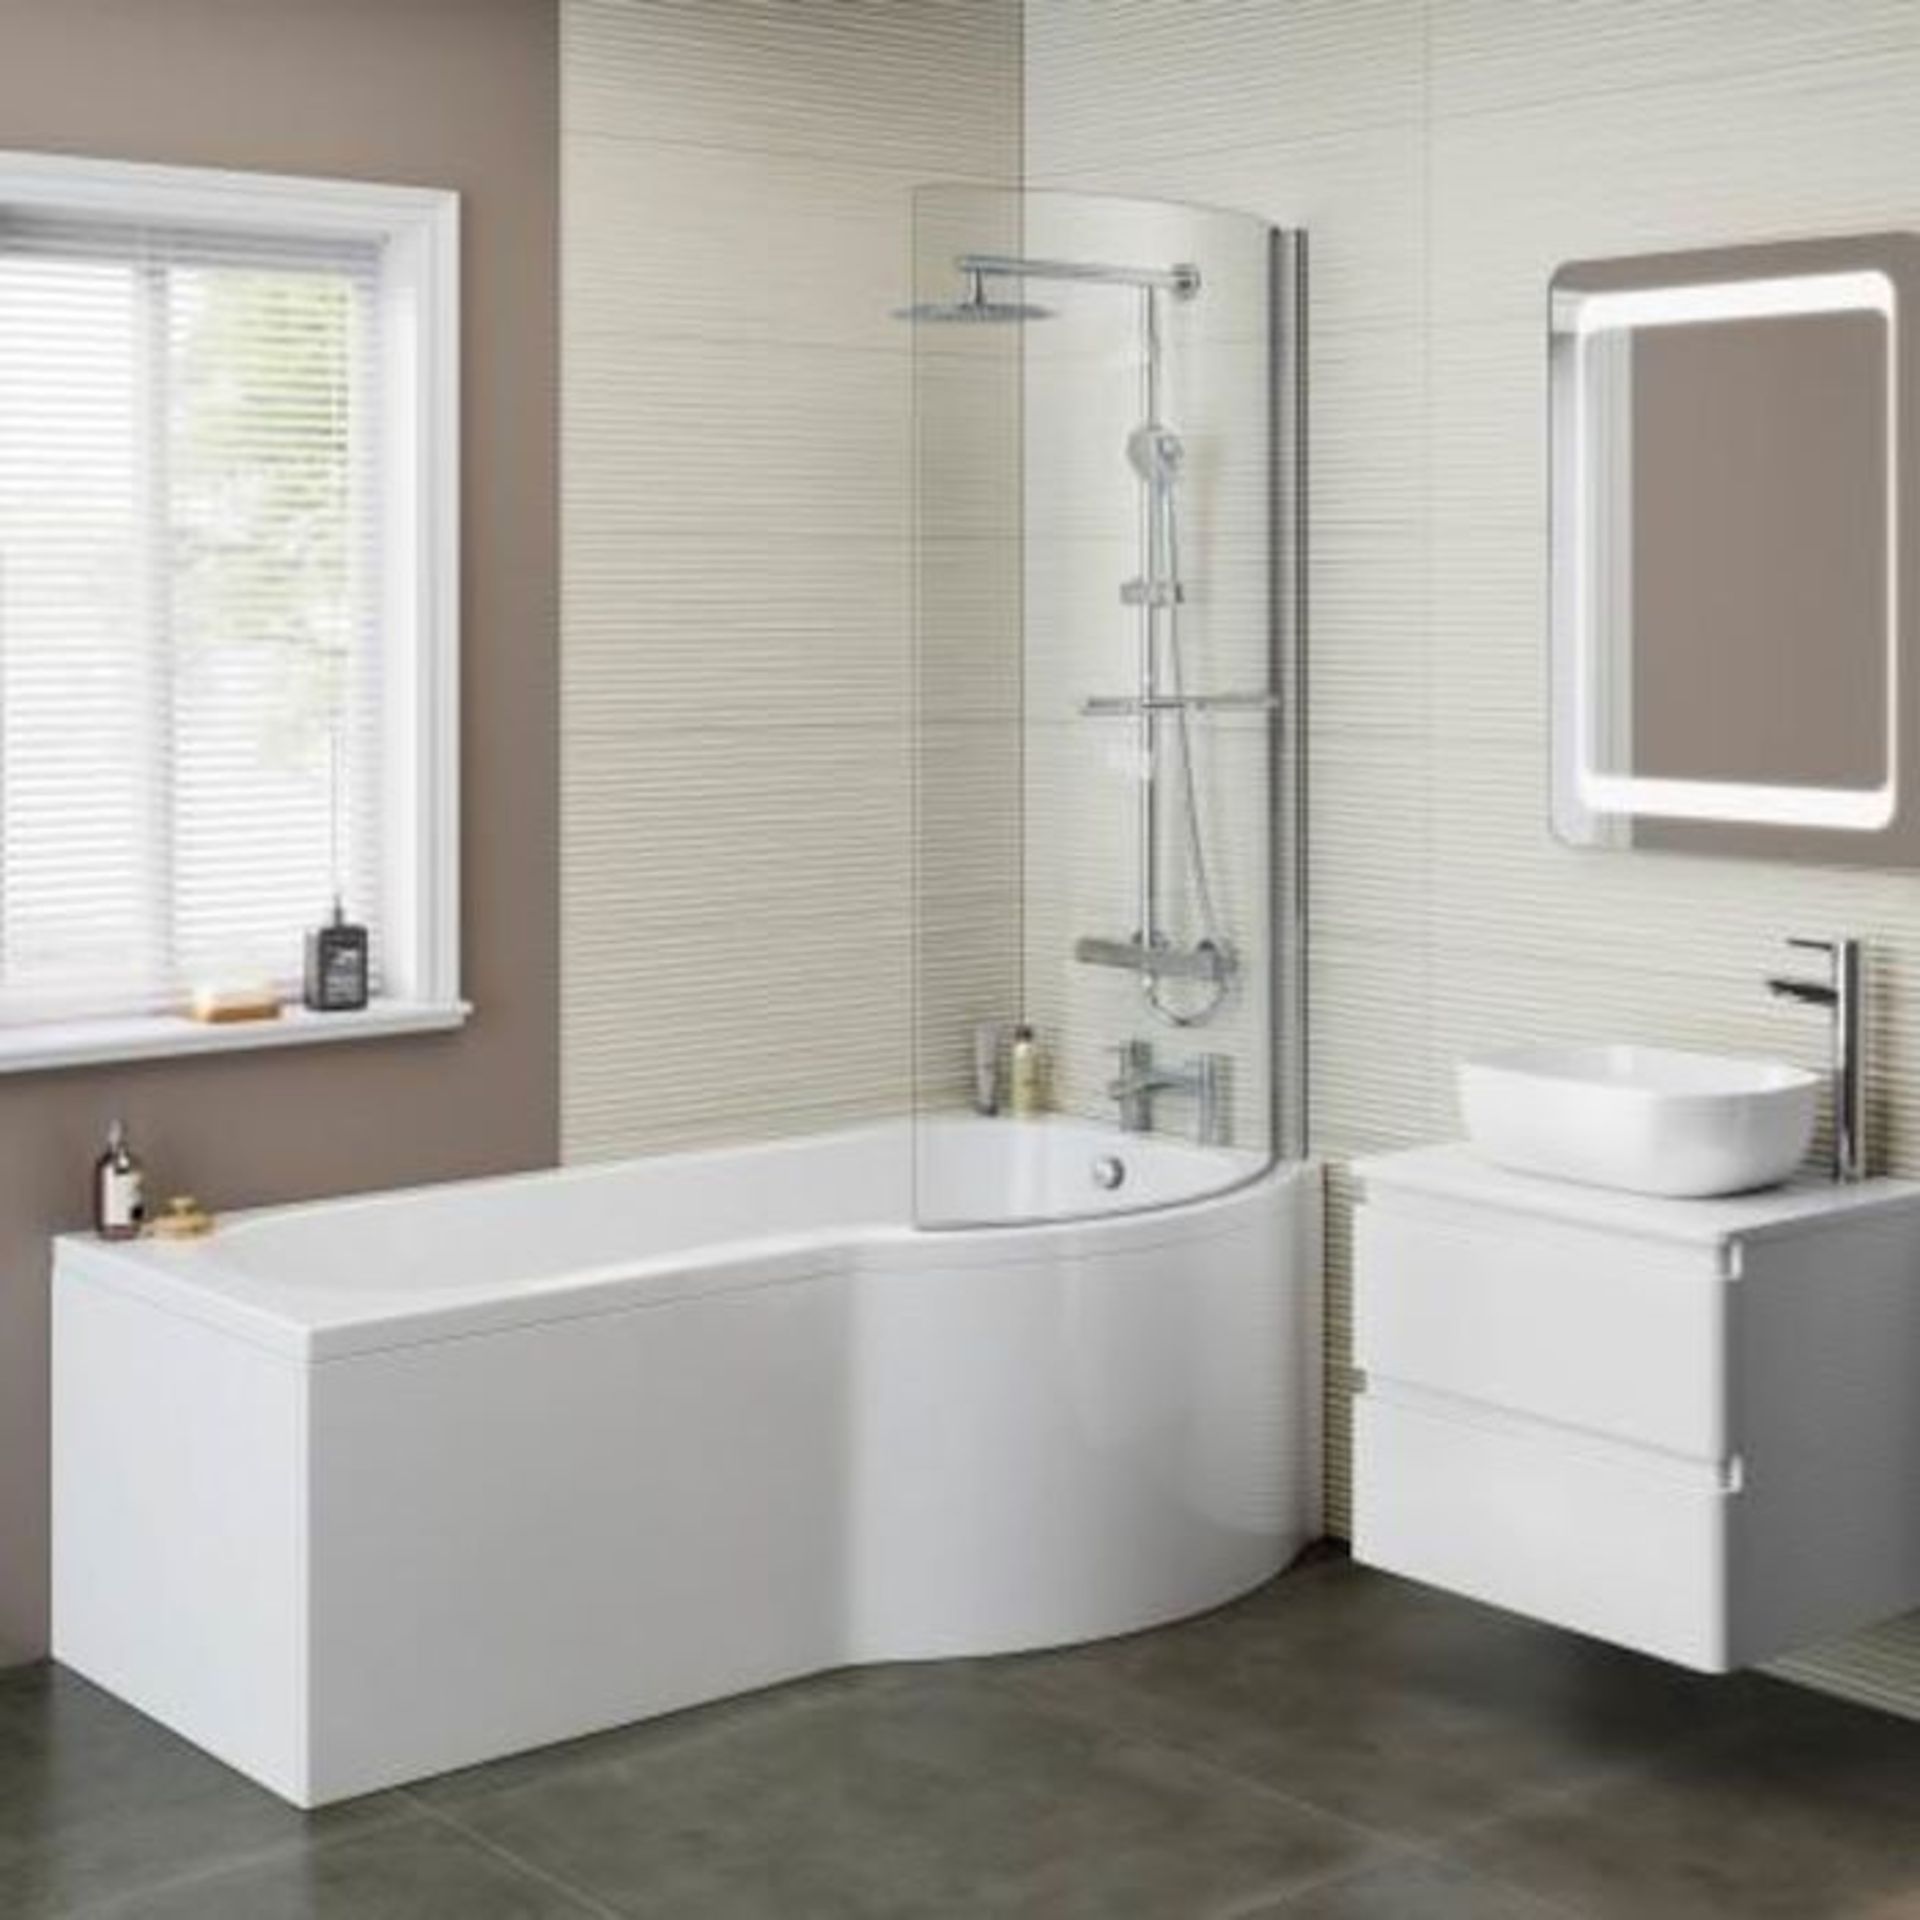 NEW (L47) 1700x850mm - P-Shaped Bath.. RRP £399.99. Ideal space saving solution for smaller b... - Image 2 of 3